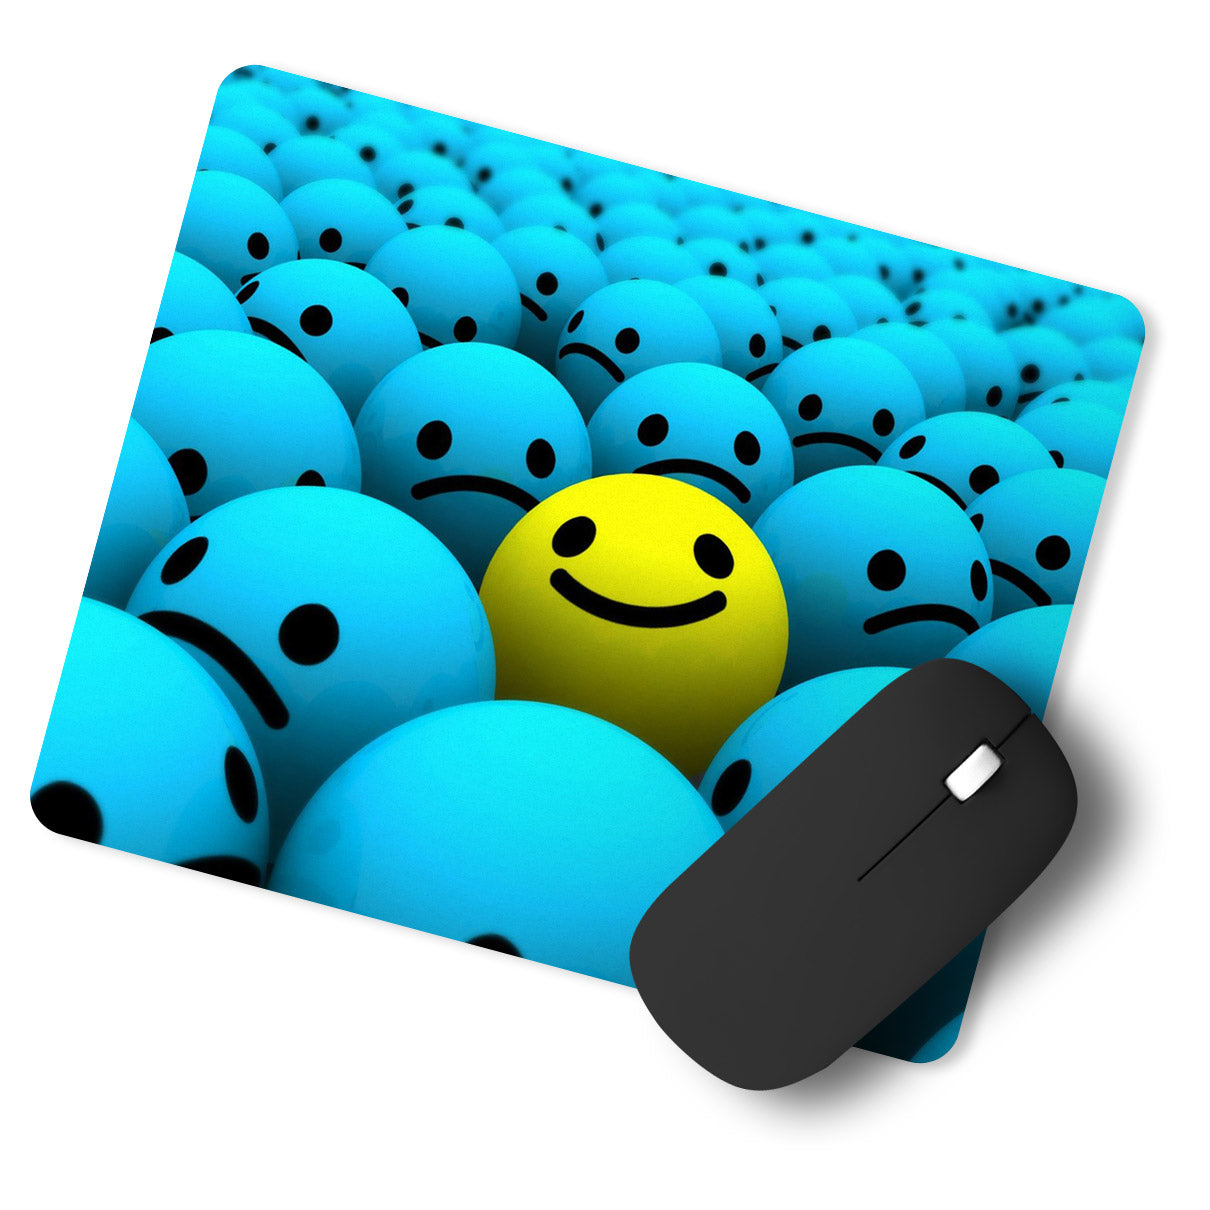 Smiley Background Designer Printed Premium Mouse pad (9 in x 7.5 in)